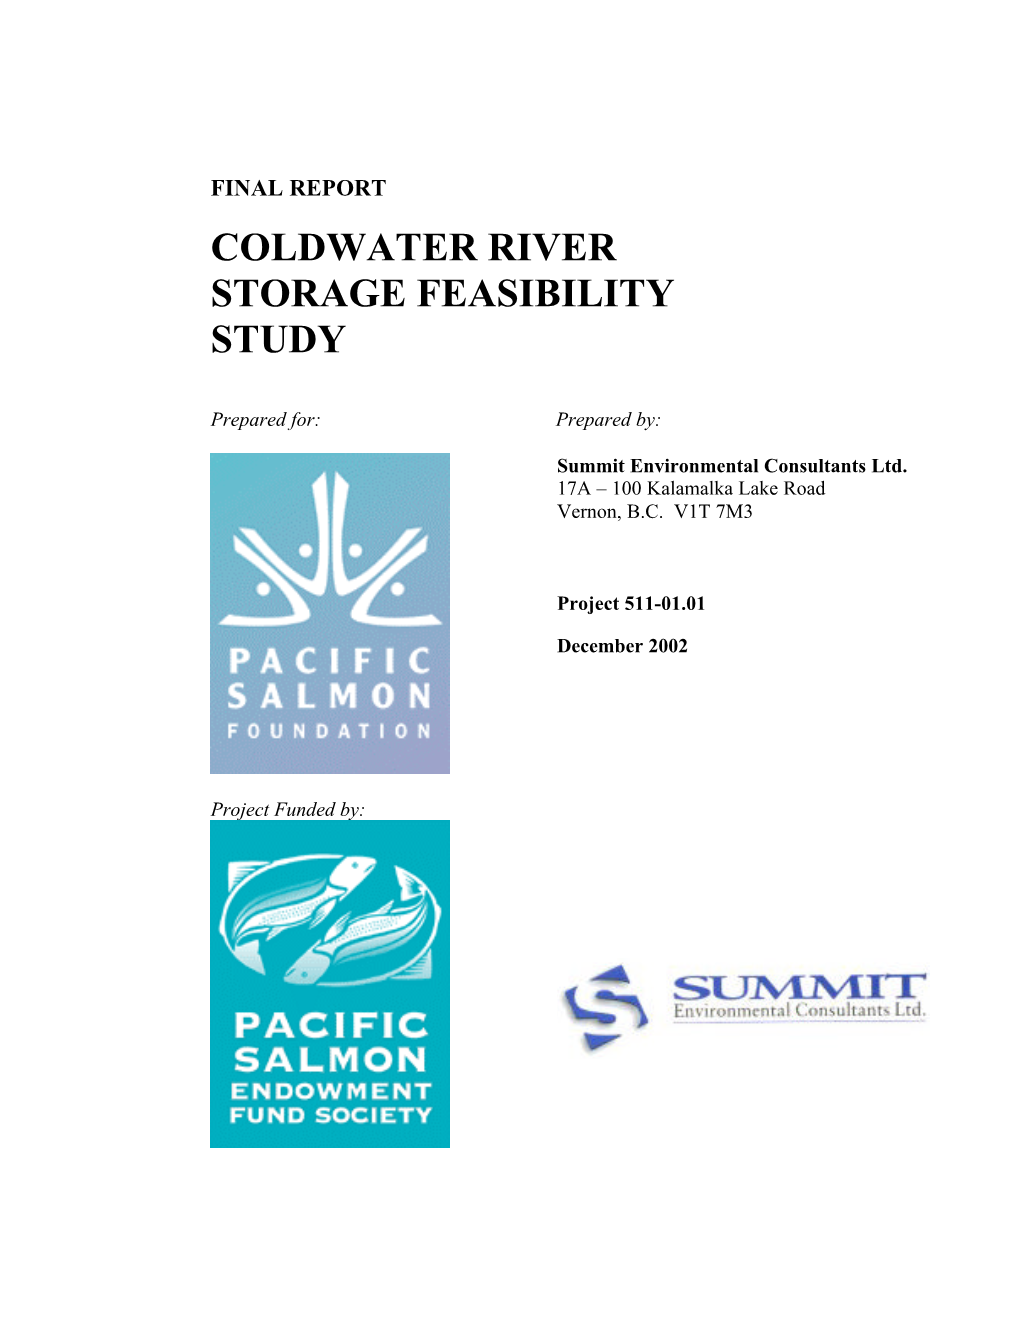 Coldwater River Storage Feasibility Study